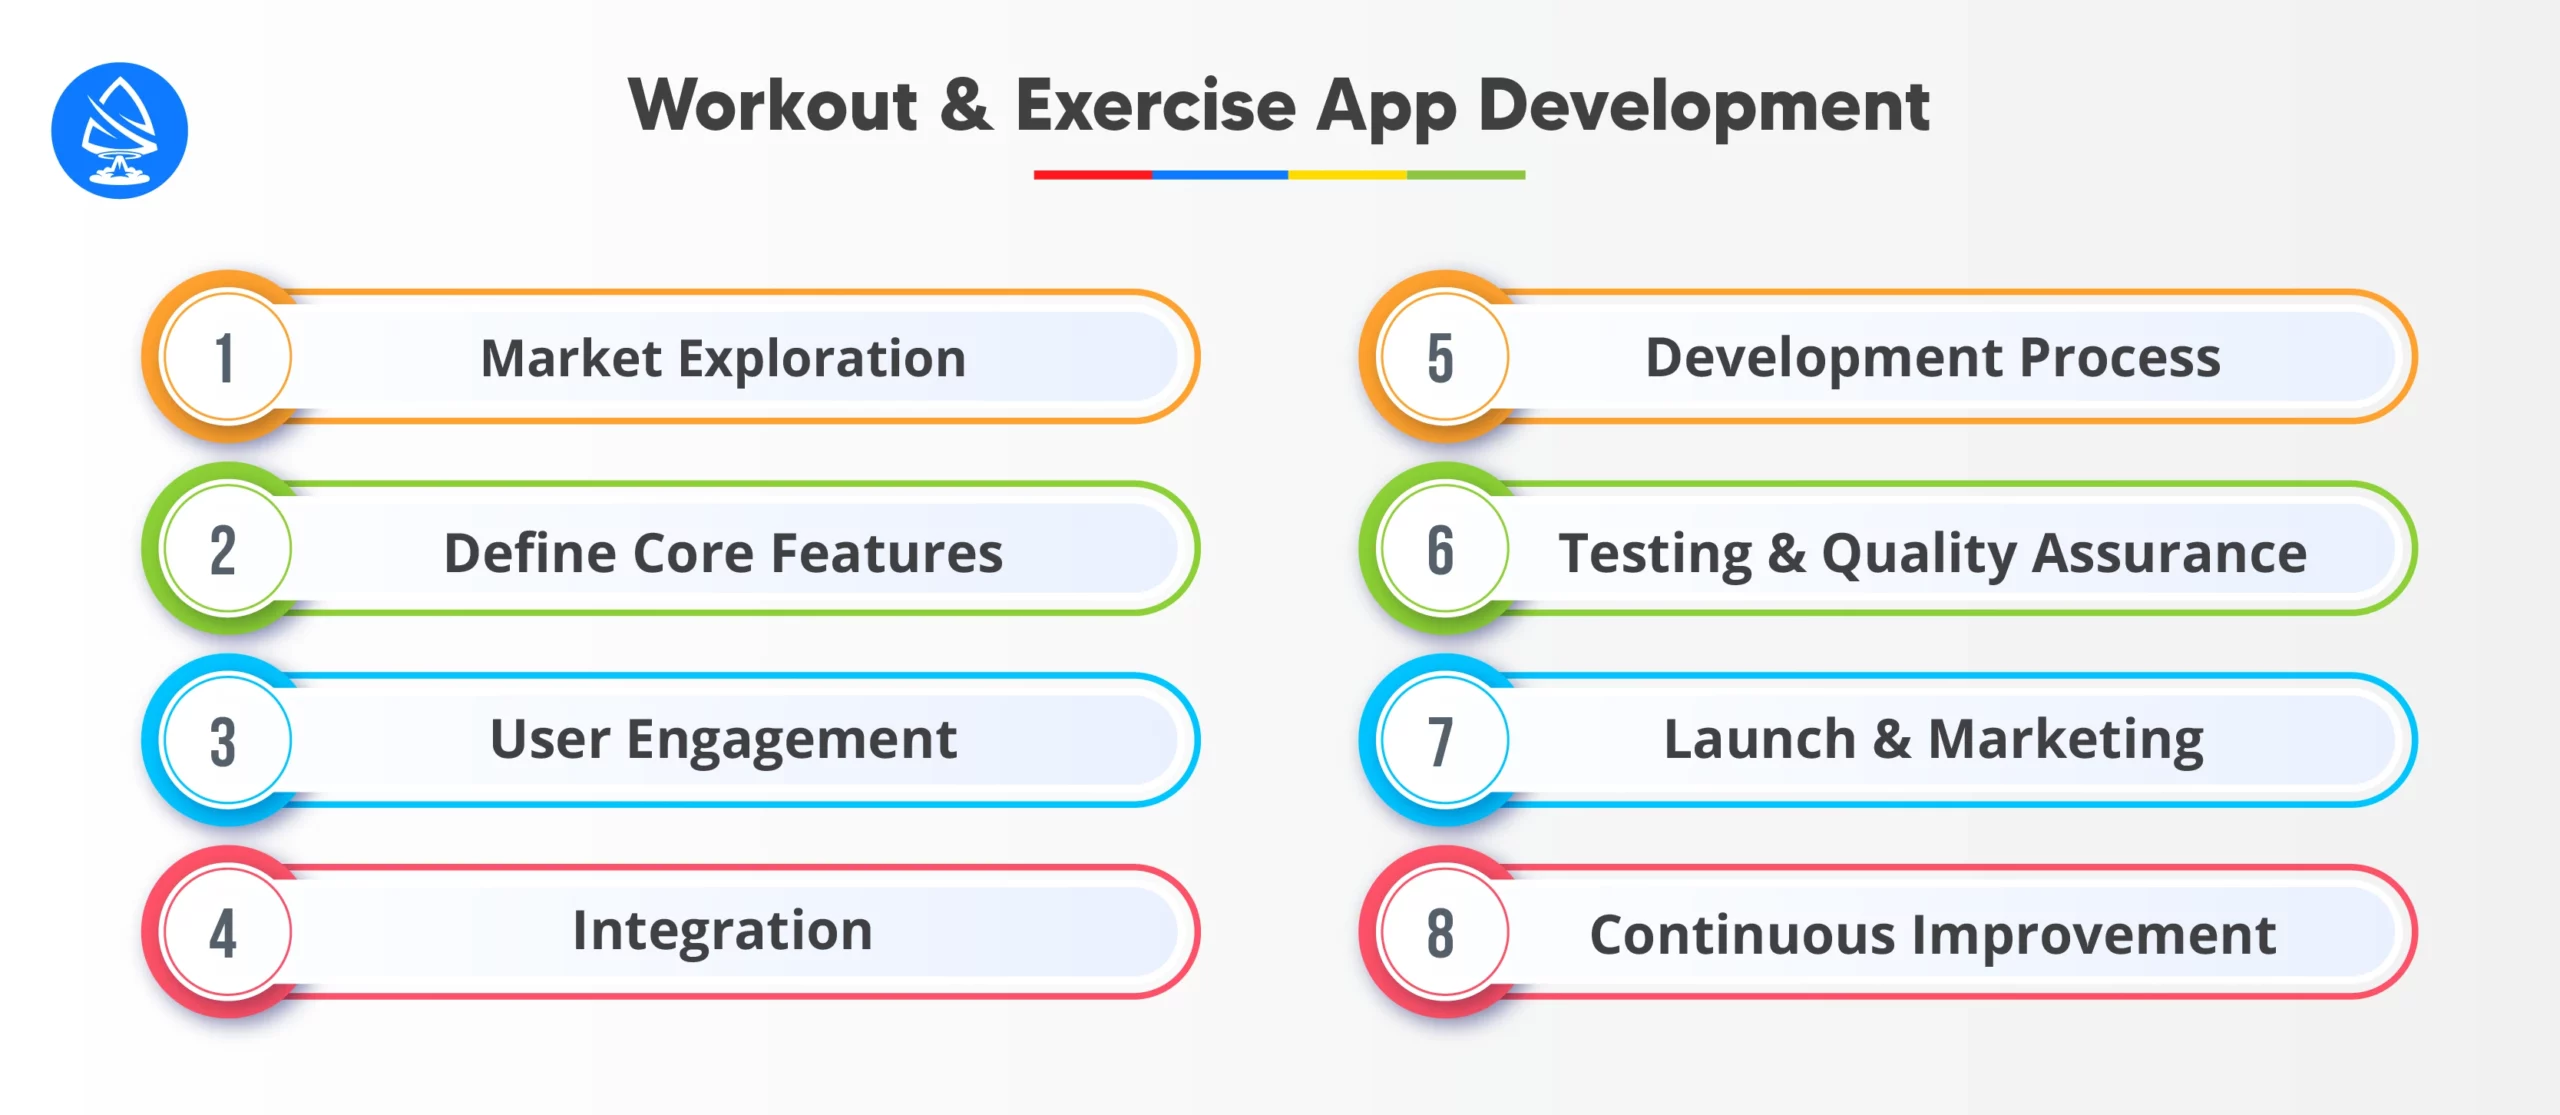 Workout and Exercise App Development